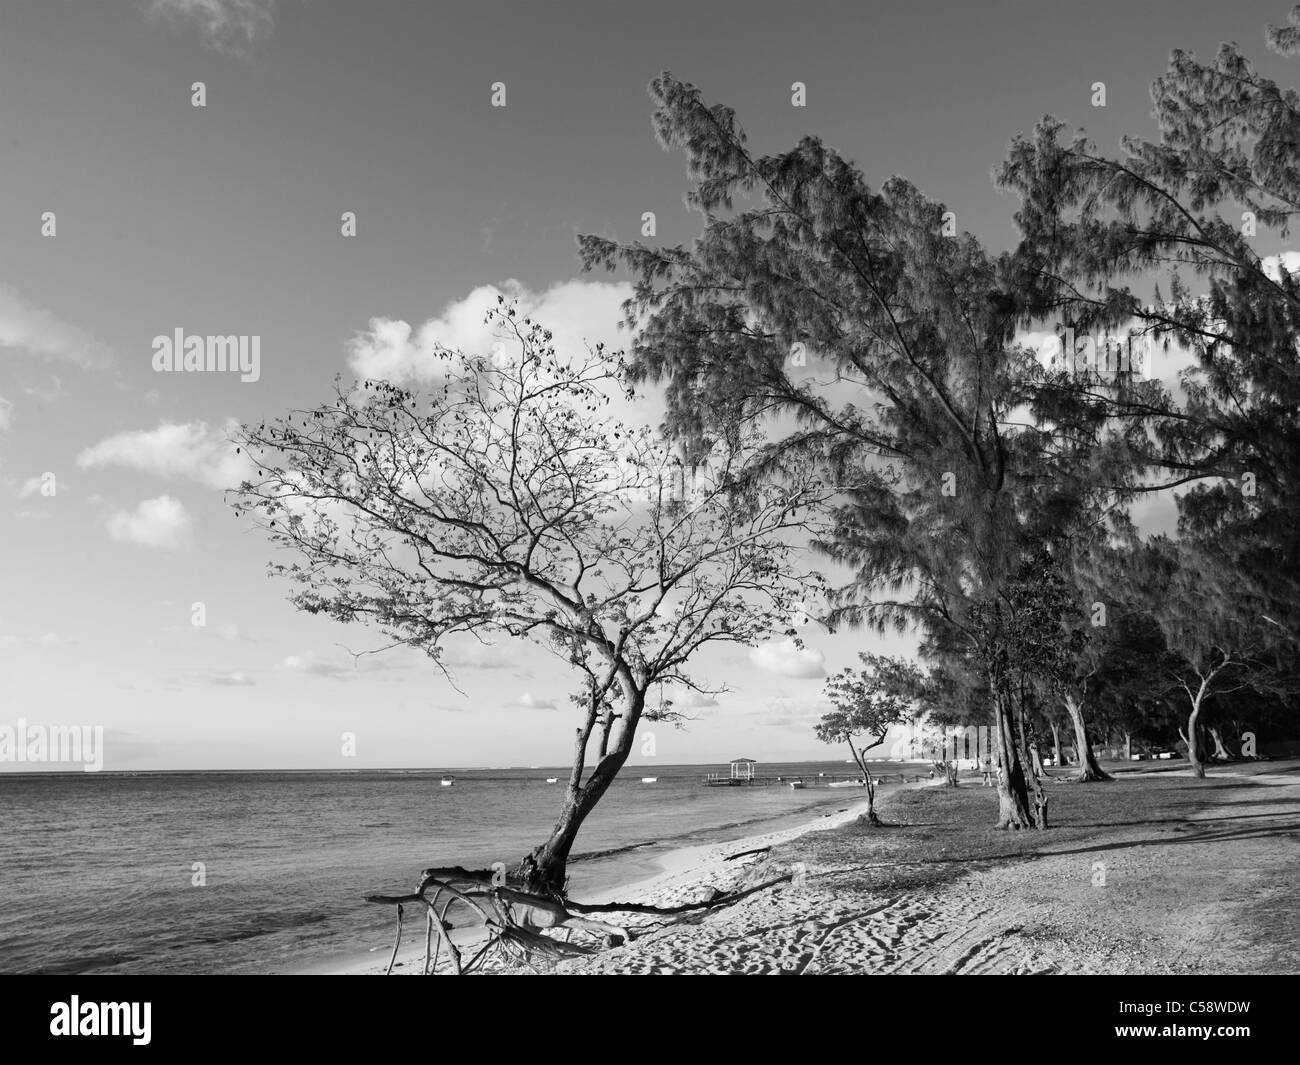 Le Morne Beach Mauritius Tree on Beach with Roots Exposed Stock Photo